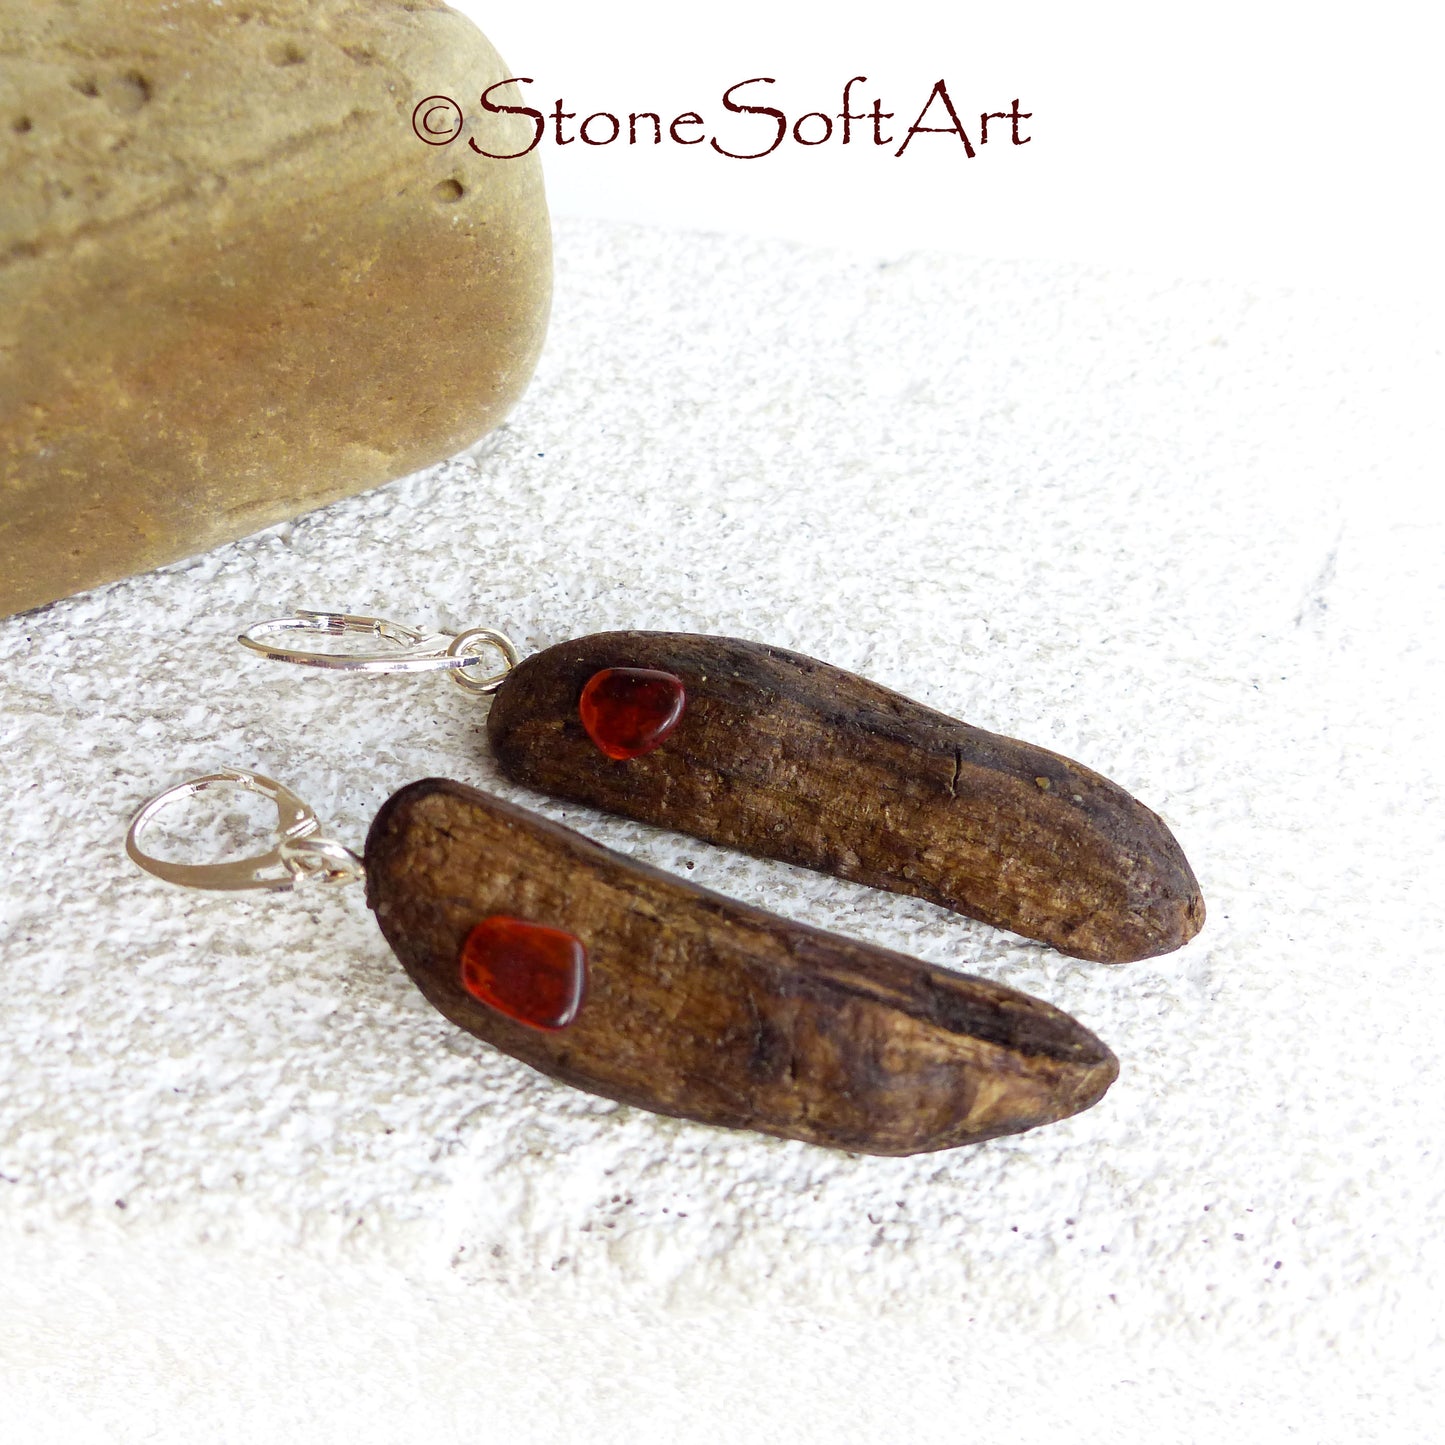 Driftwood Earrings SHANIA with Amber and 925 Silver, handmade eco friendly gift